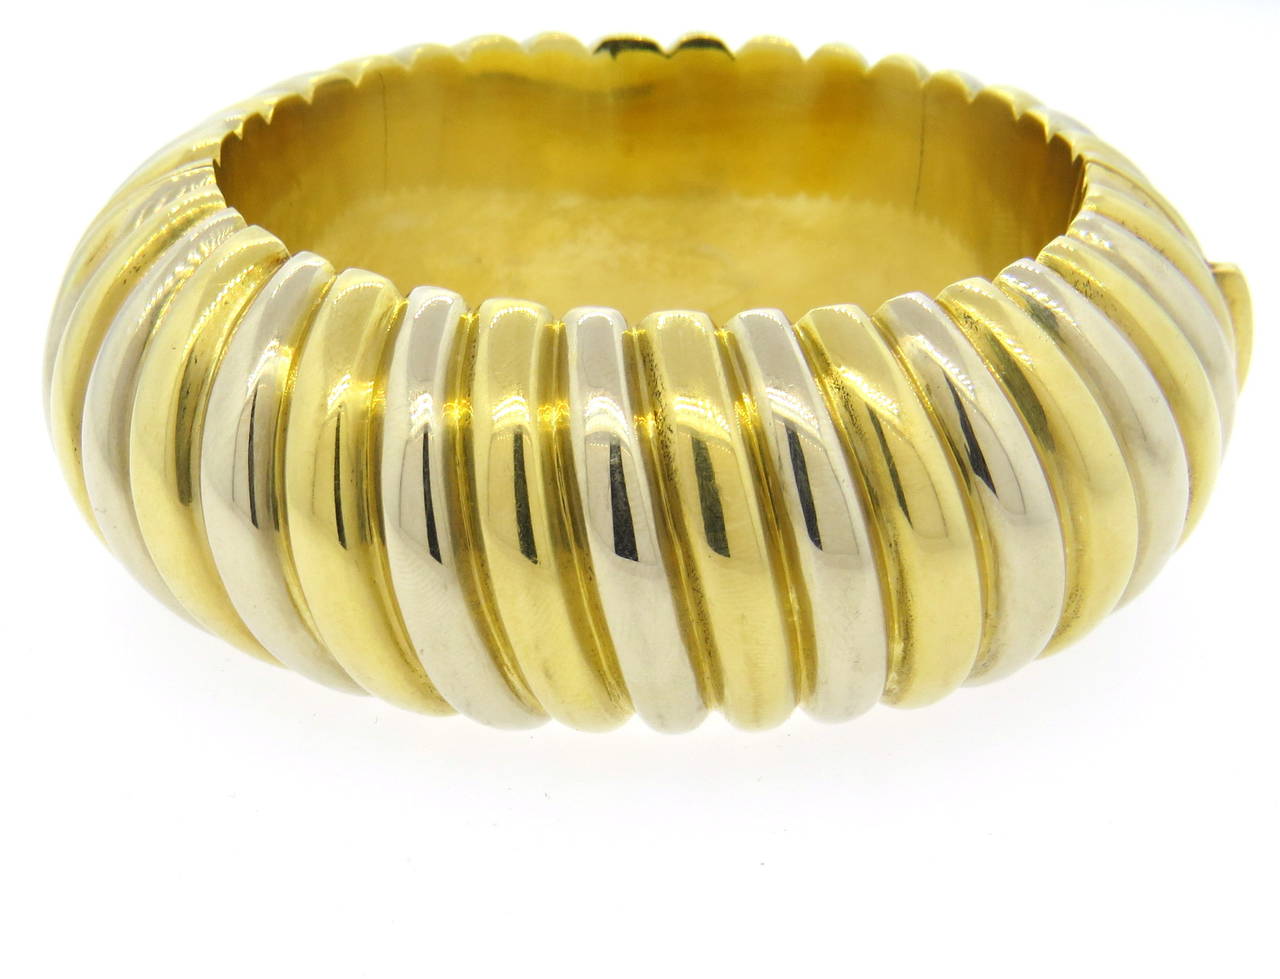 1980s Massive Italian 18k Yellow and White Gold Wide Bangle Bracelet , 30mm wide. Will fit 6 1/6 -6 3/4